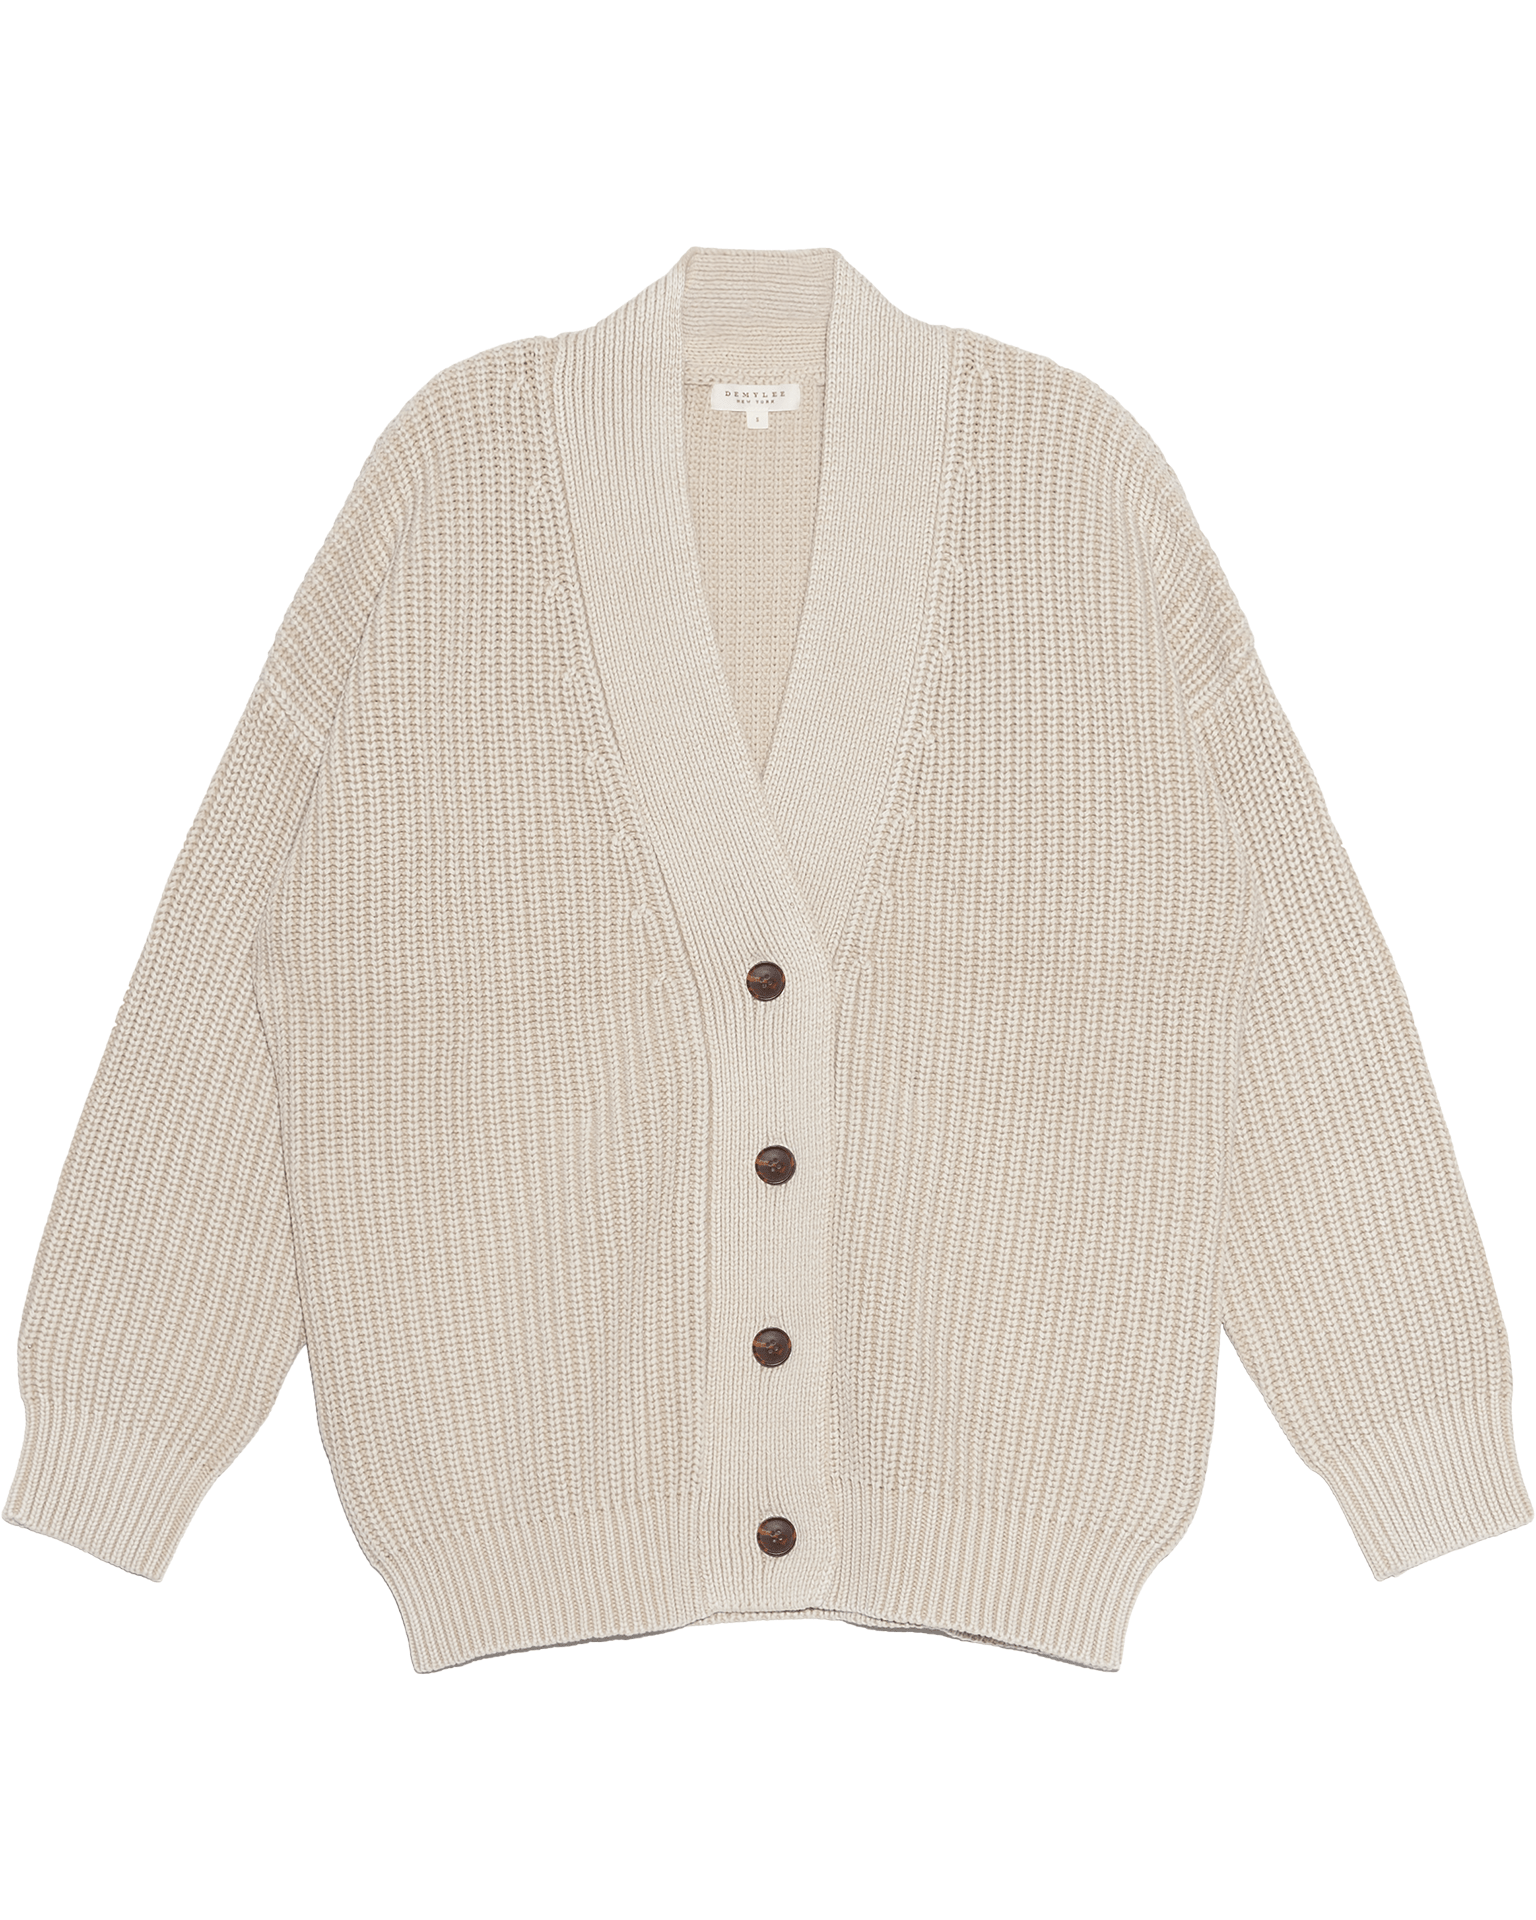 Demylee Brenna Cardigan in Sand - Bliss Boutiques